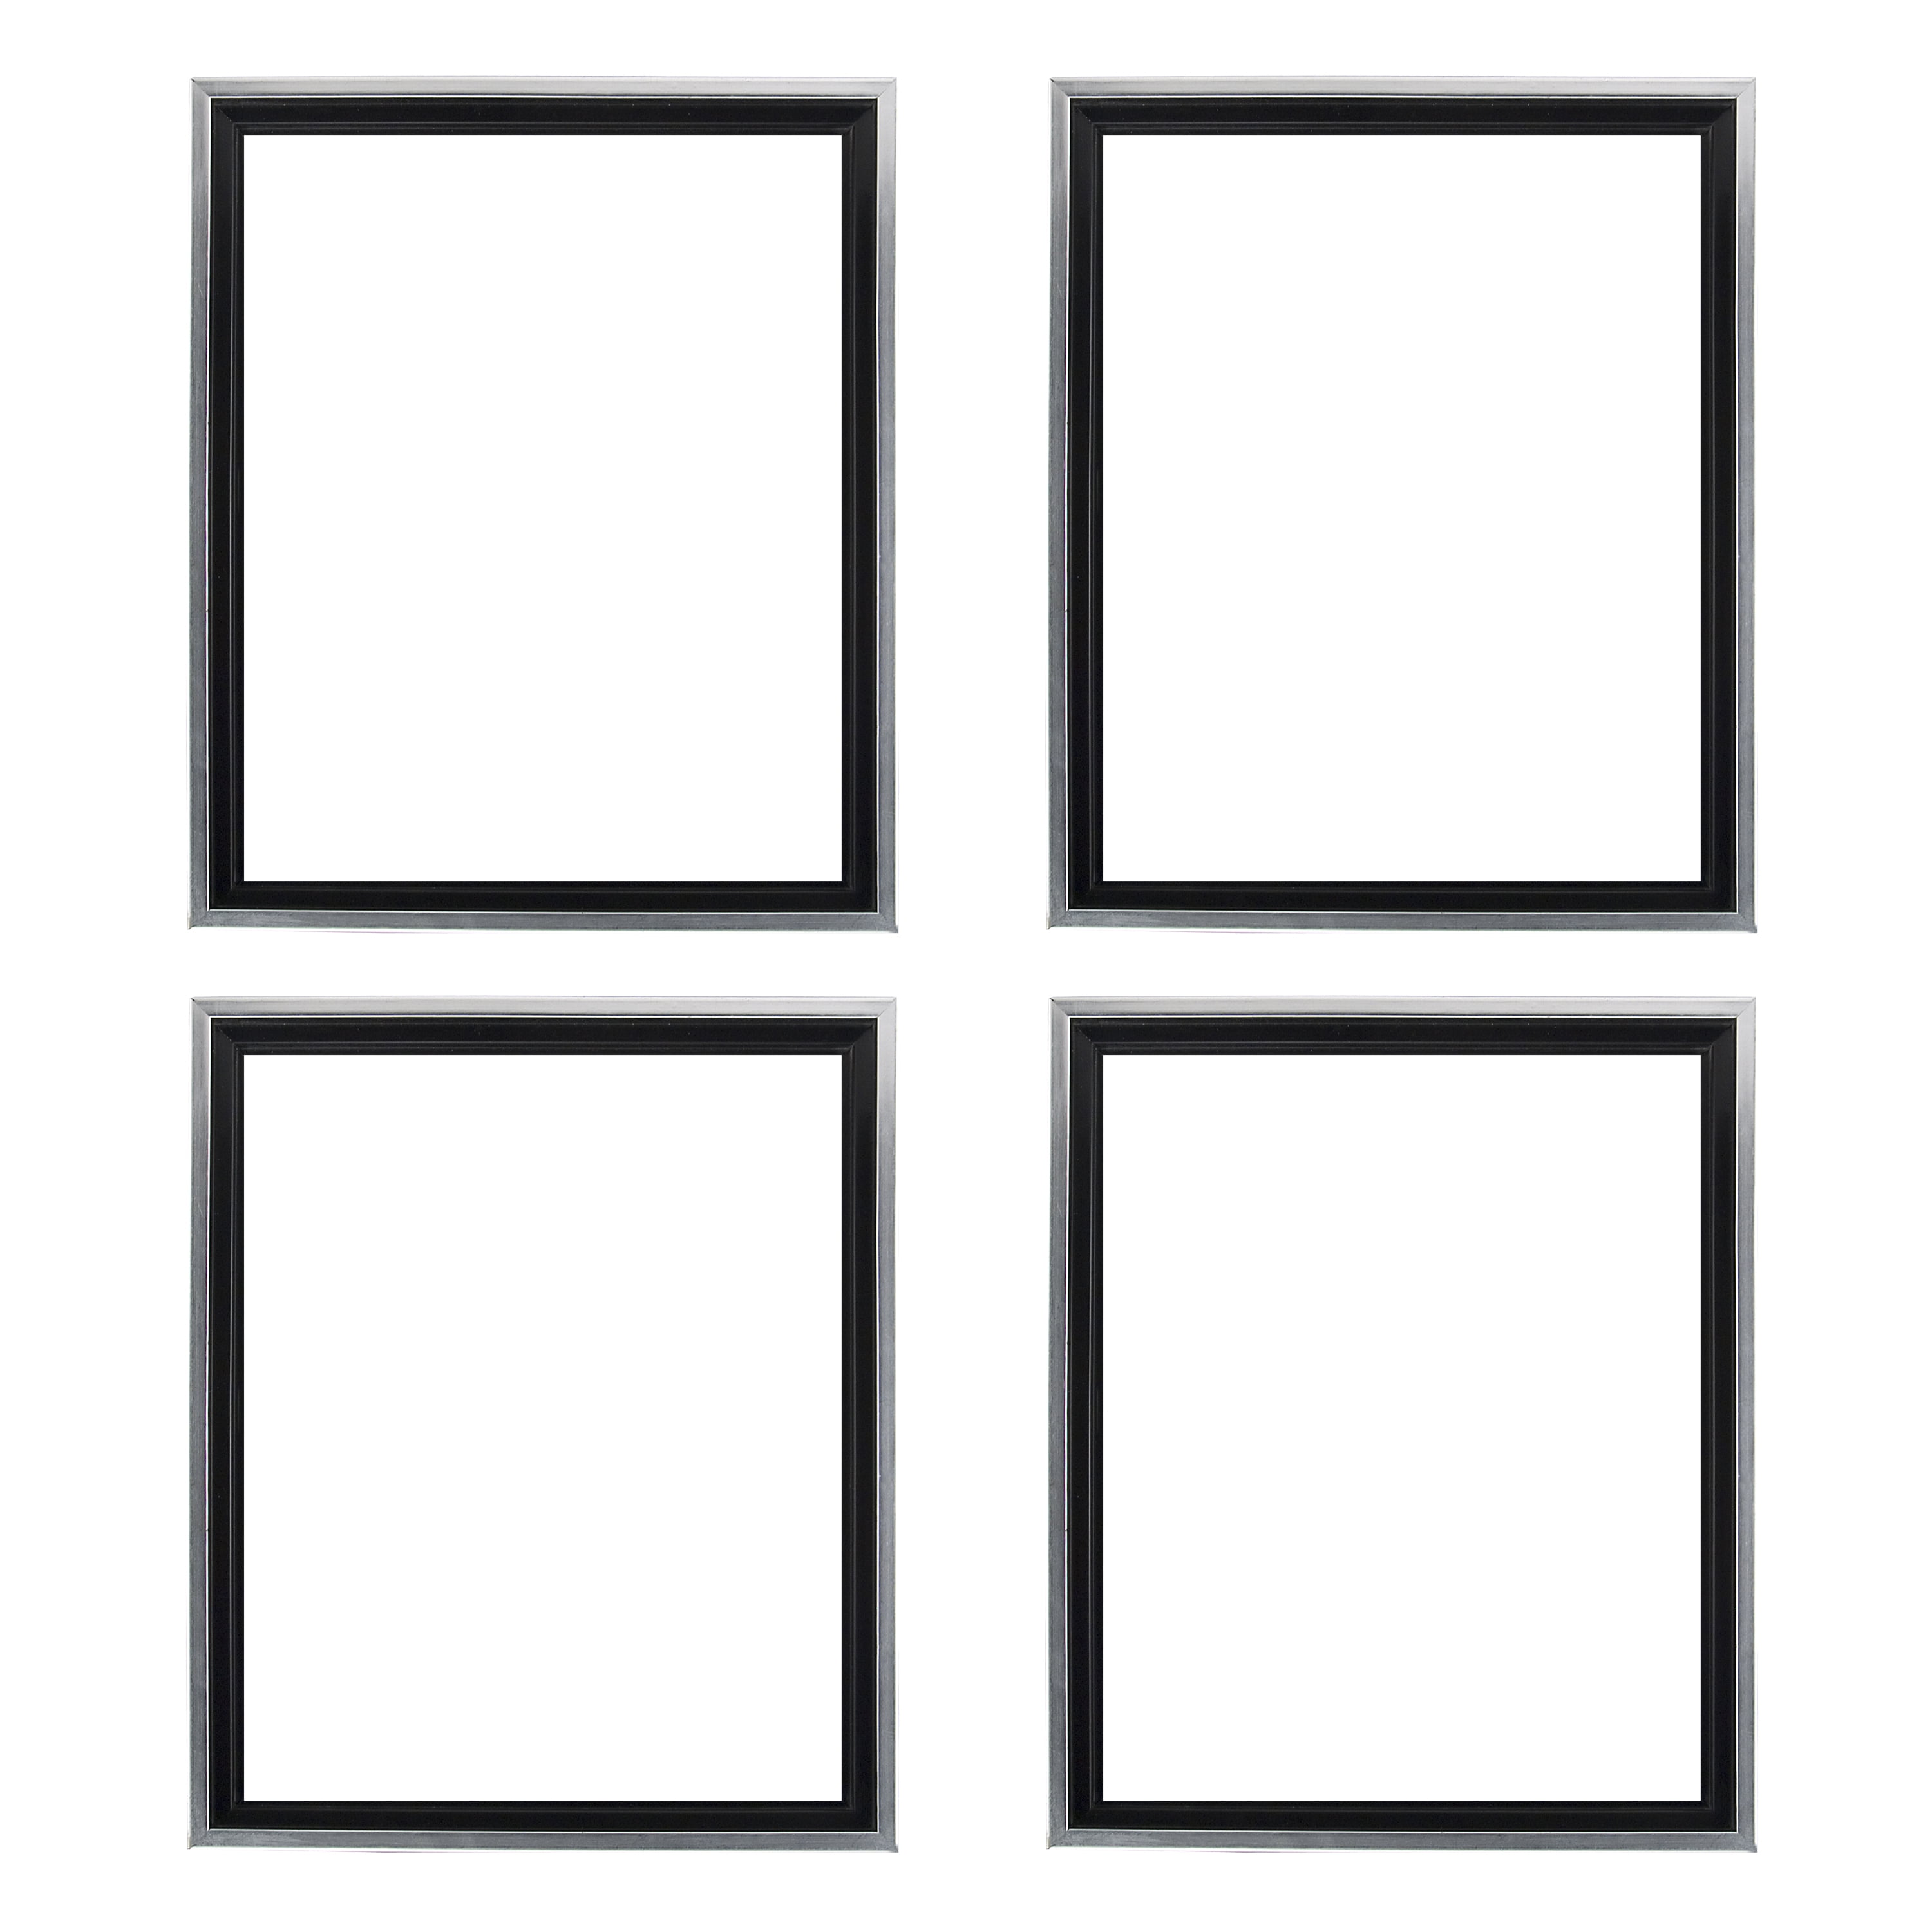 Creative Mark Illusions Floater Frames - 8x10 Black/Silver - 4 Pack of ...